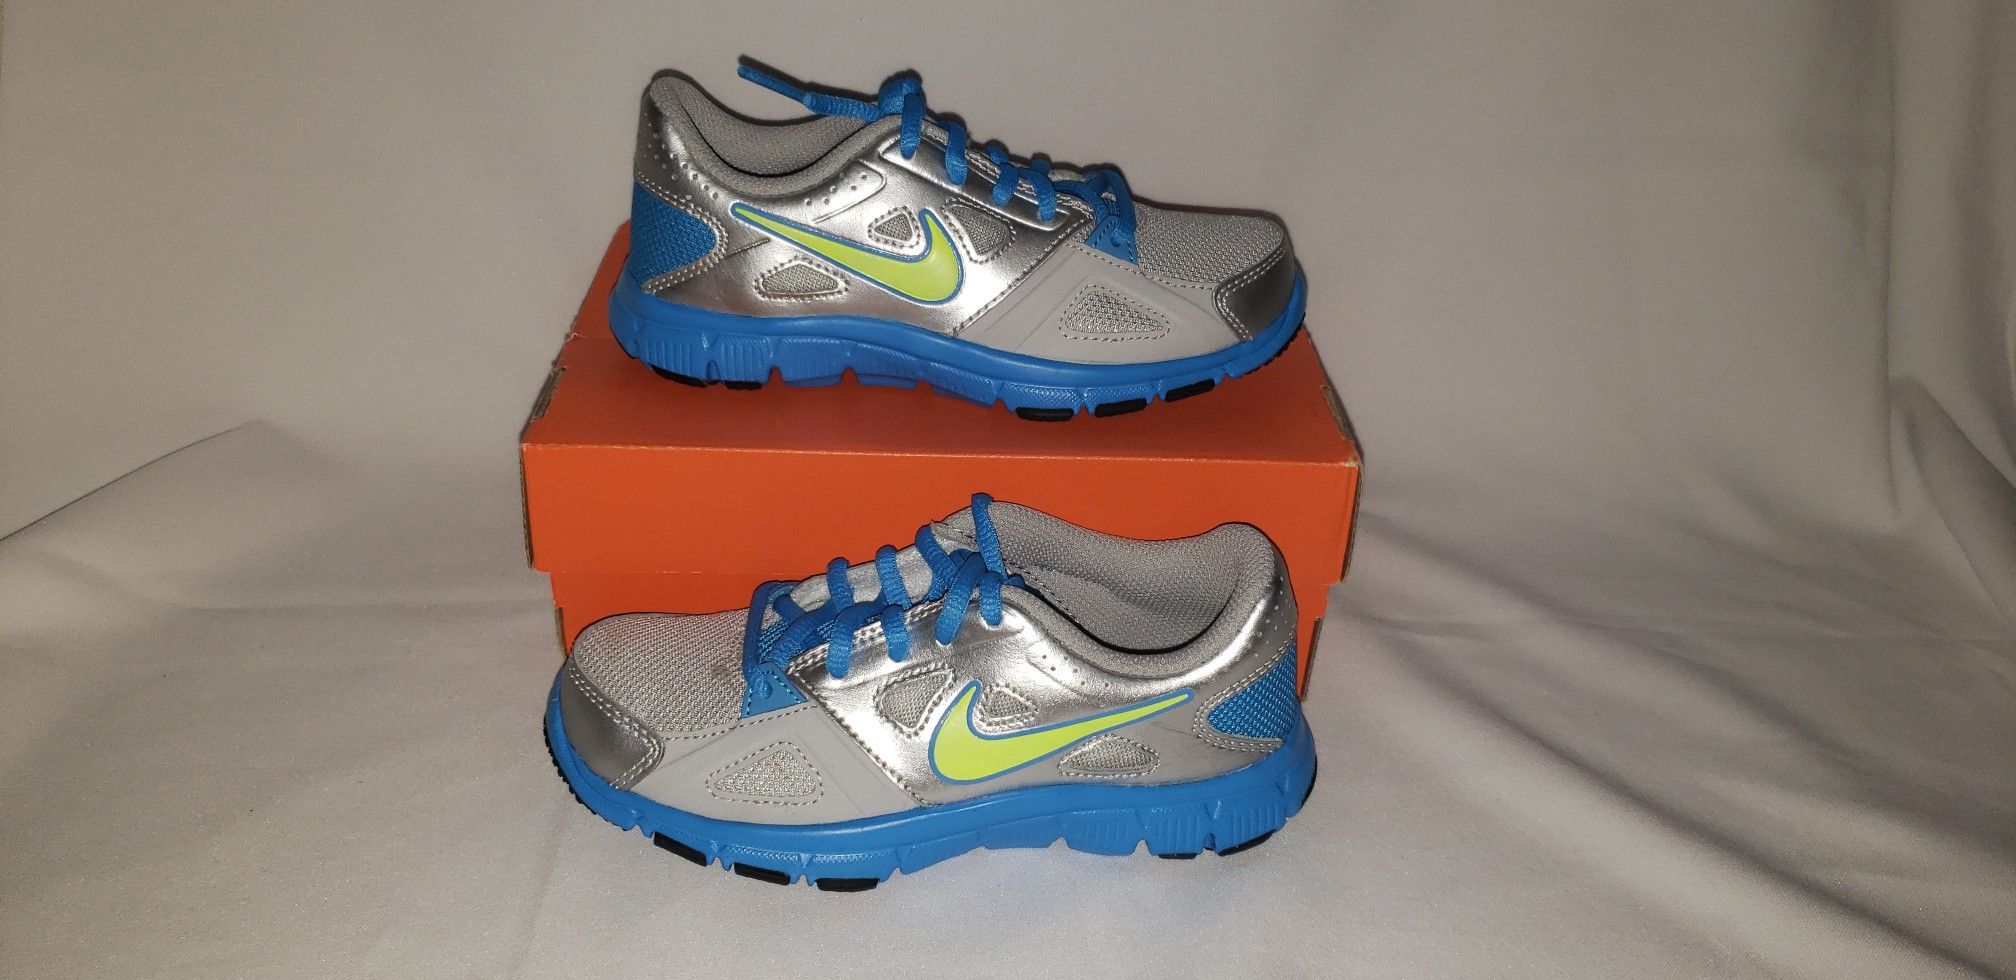 Nike Flex Supreme TR 2 Size 12.5c Brand New Shoes Silver Blue Sneakers